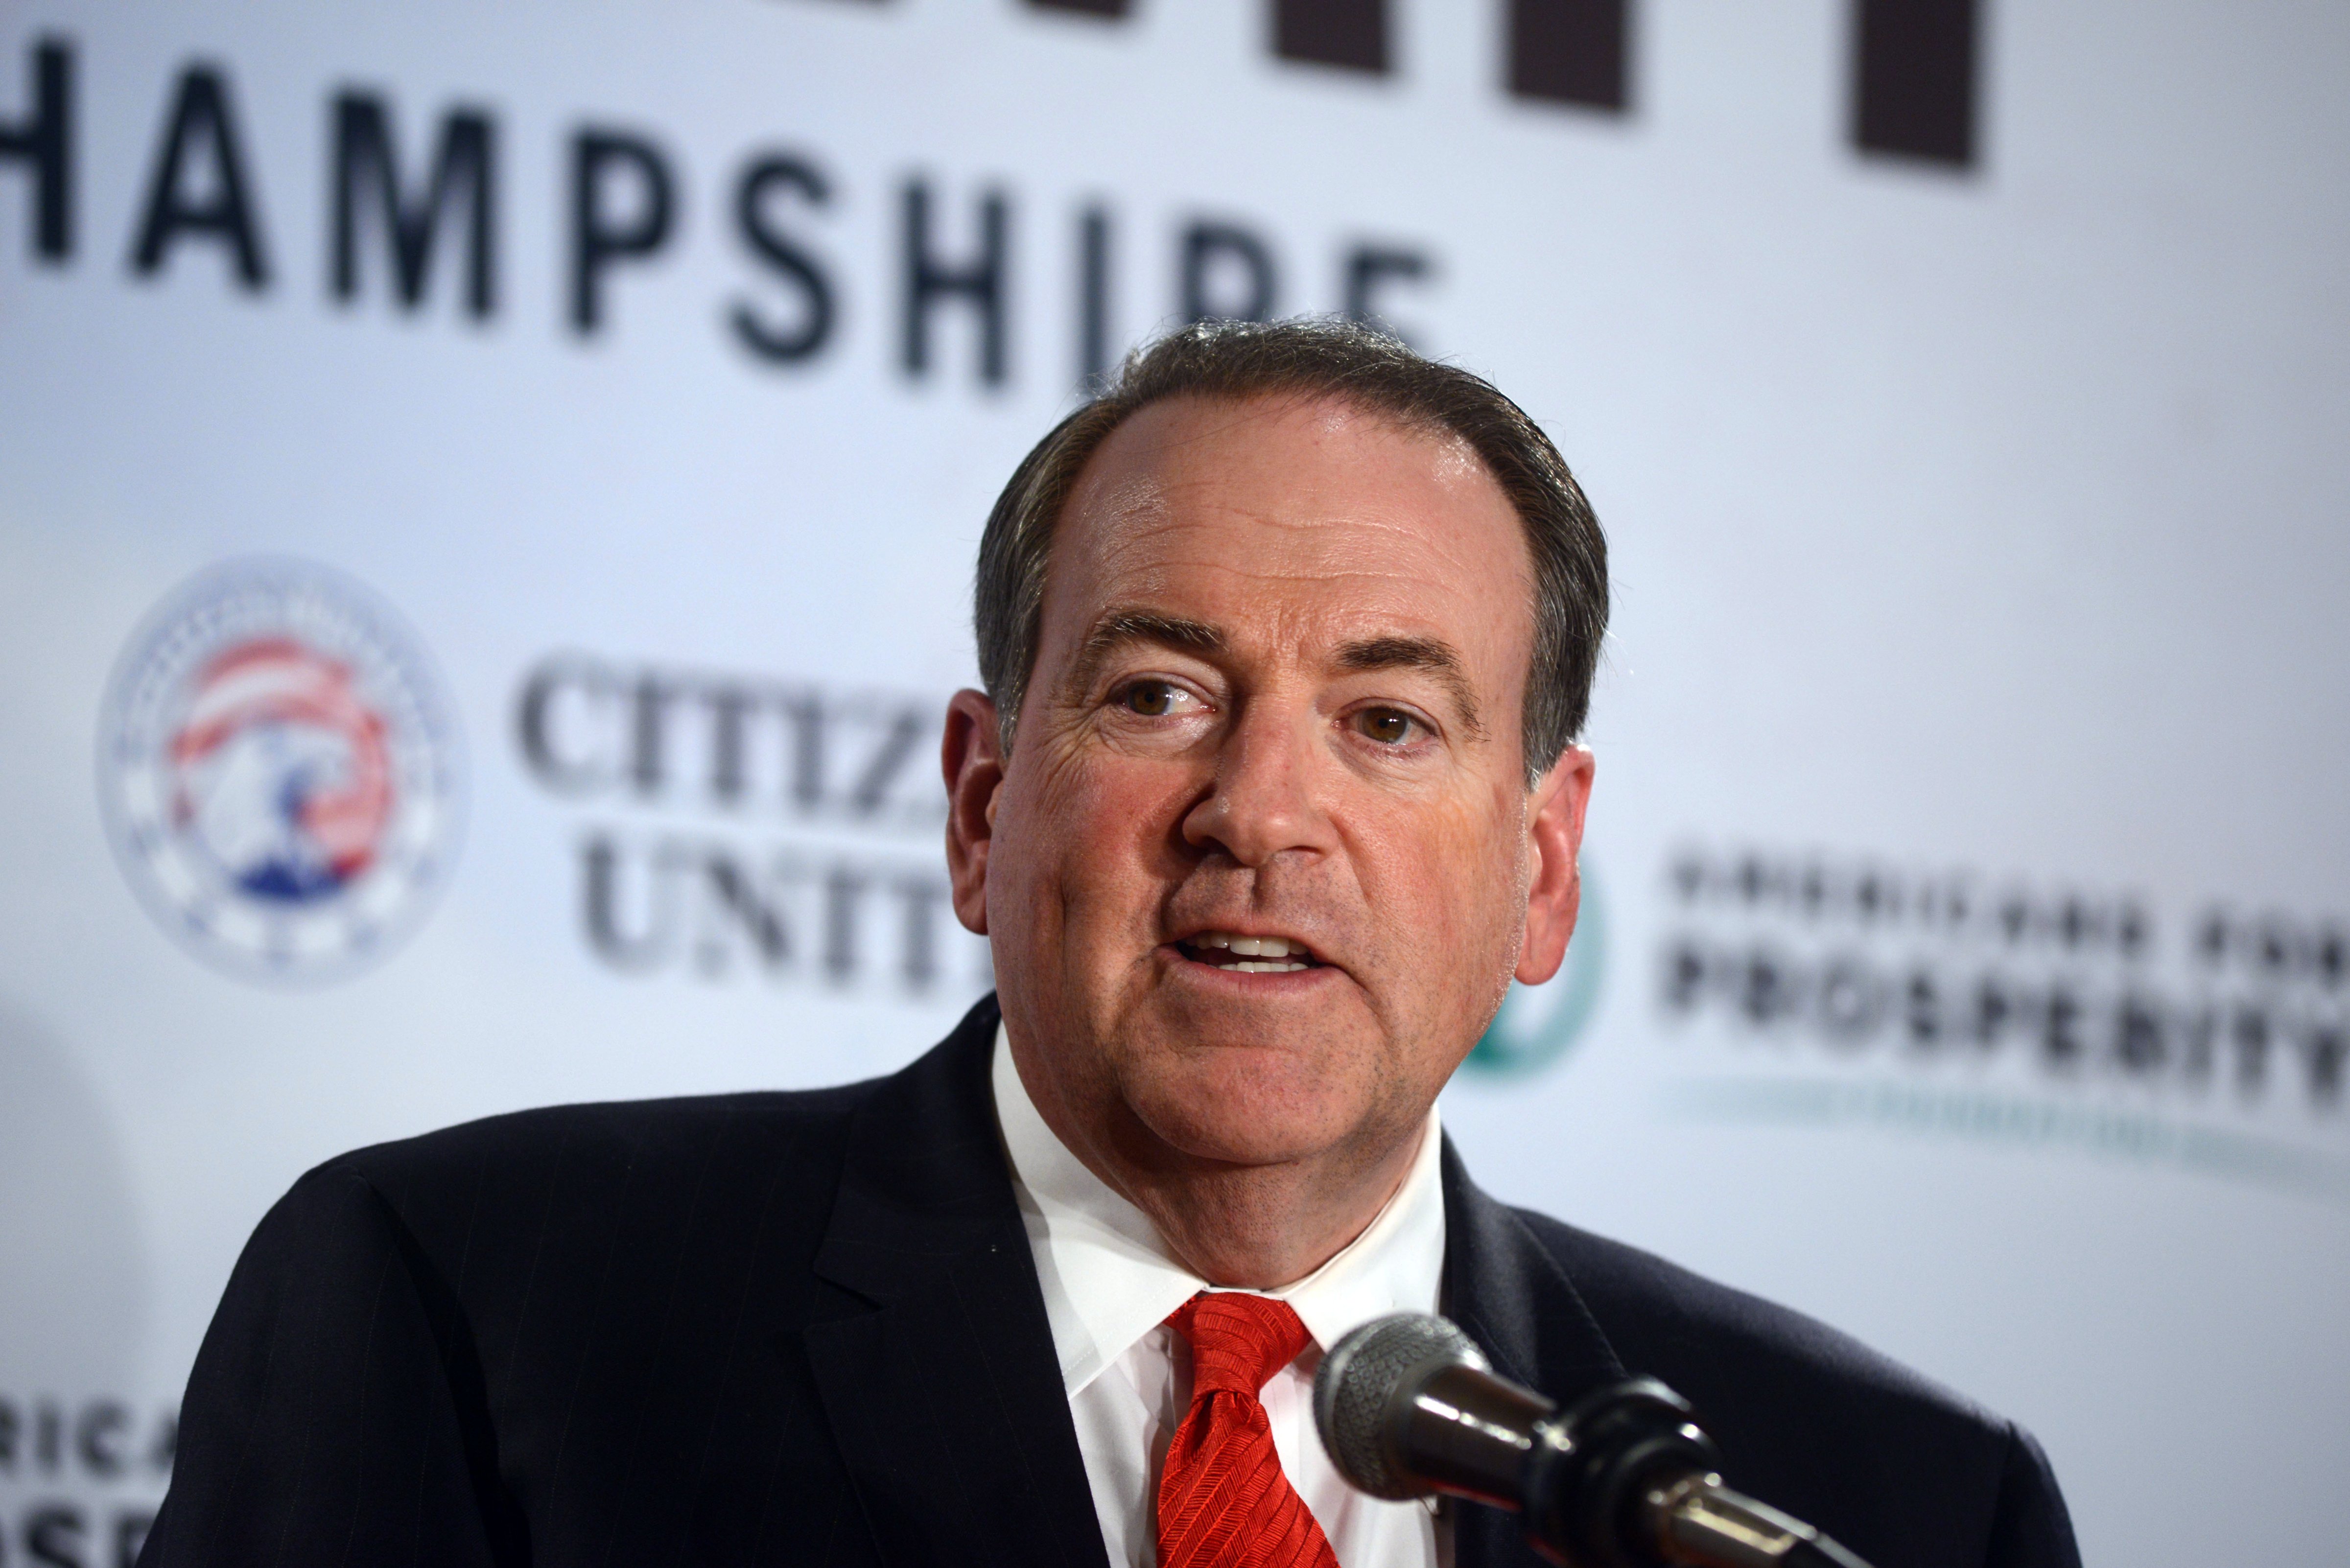 Mike Huckabee speaks at the Freedom Summit on April 12, 2014 in New Hampshire. (Darren McCollester—Getty Images)